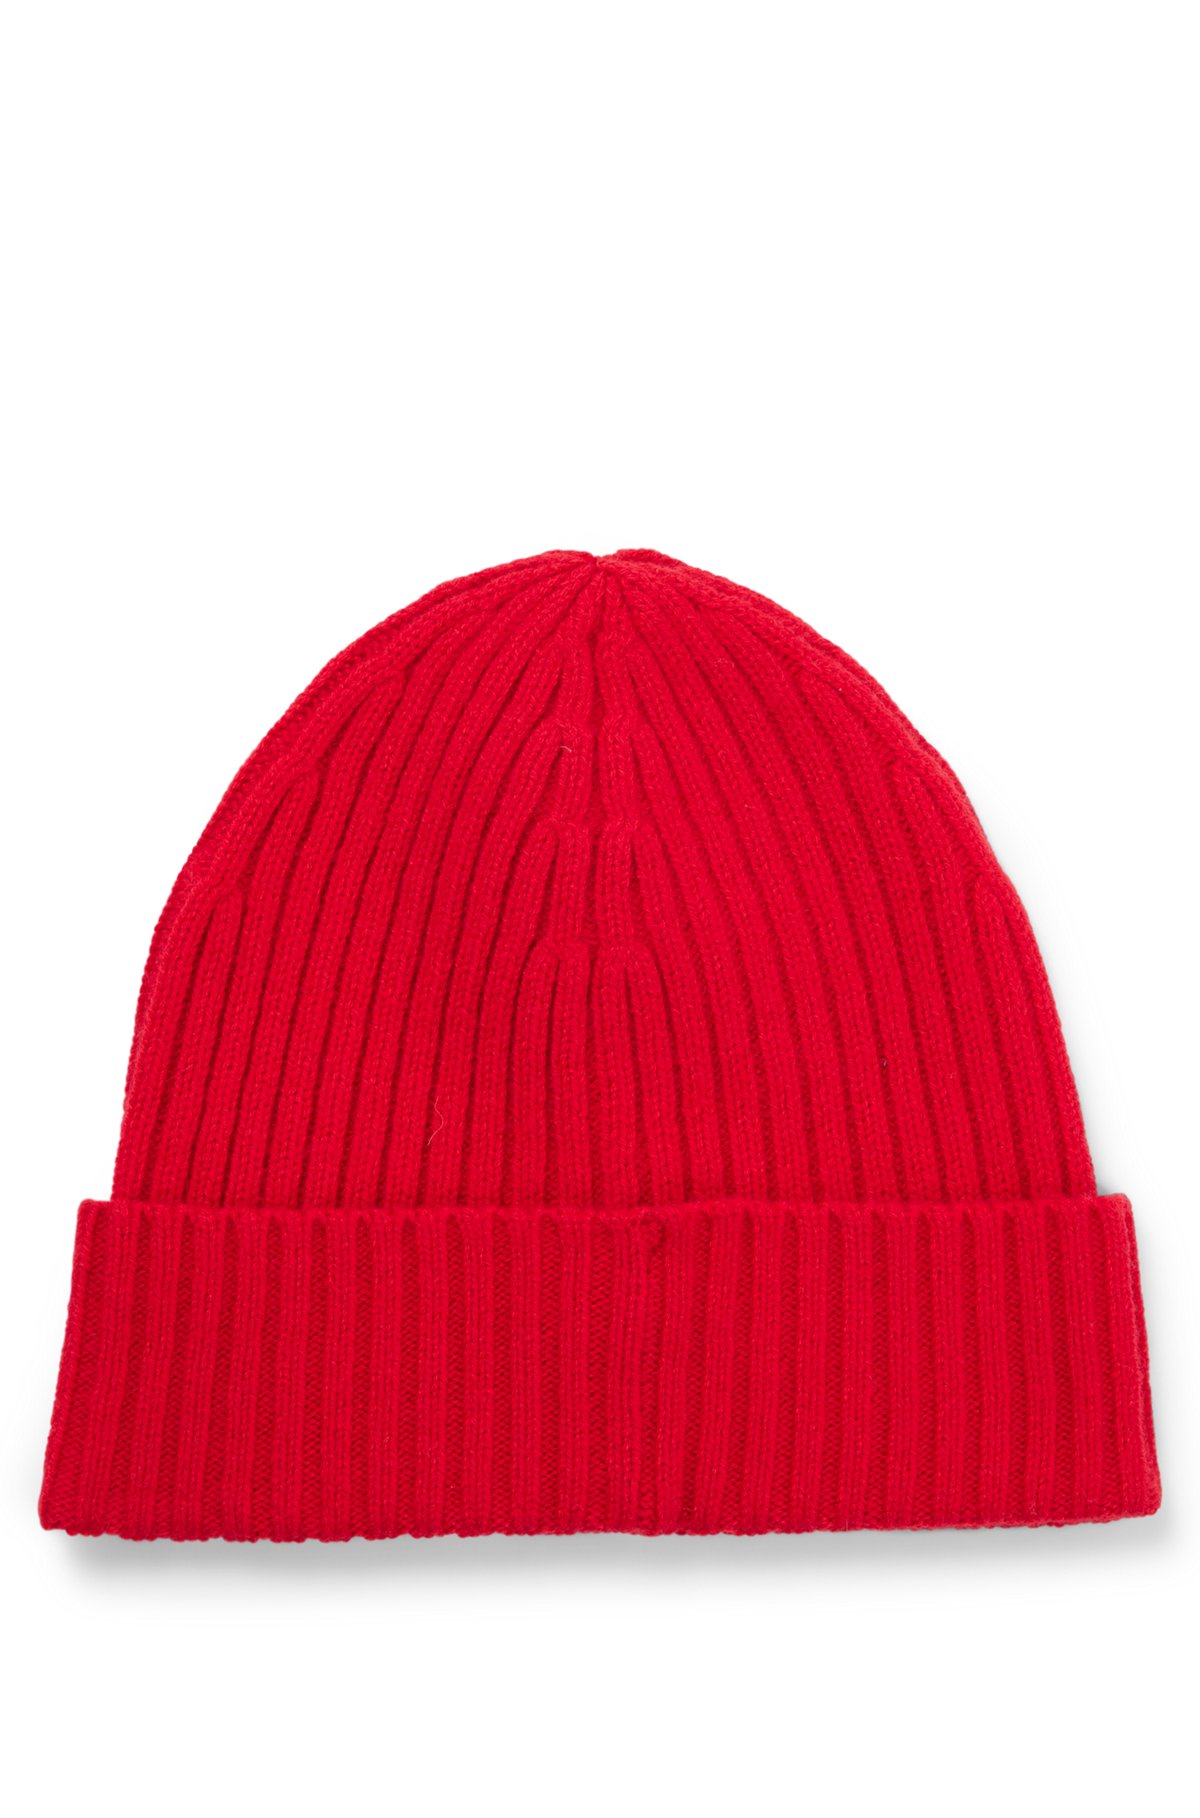 HUGO - Beanie hat in virgin wool with embroidered logo